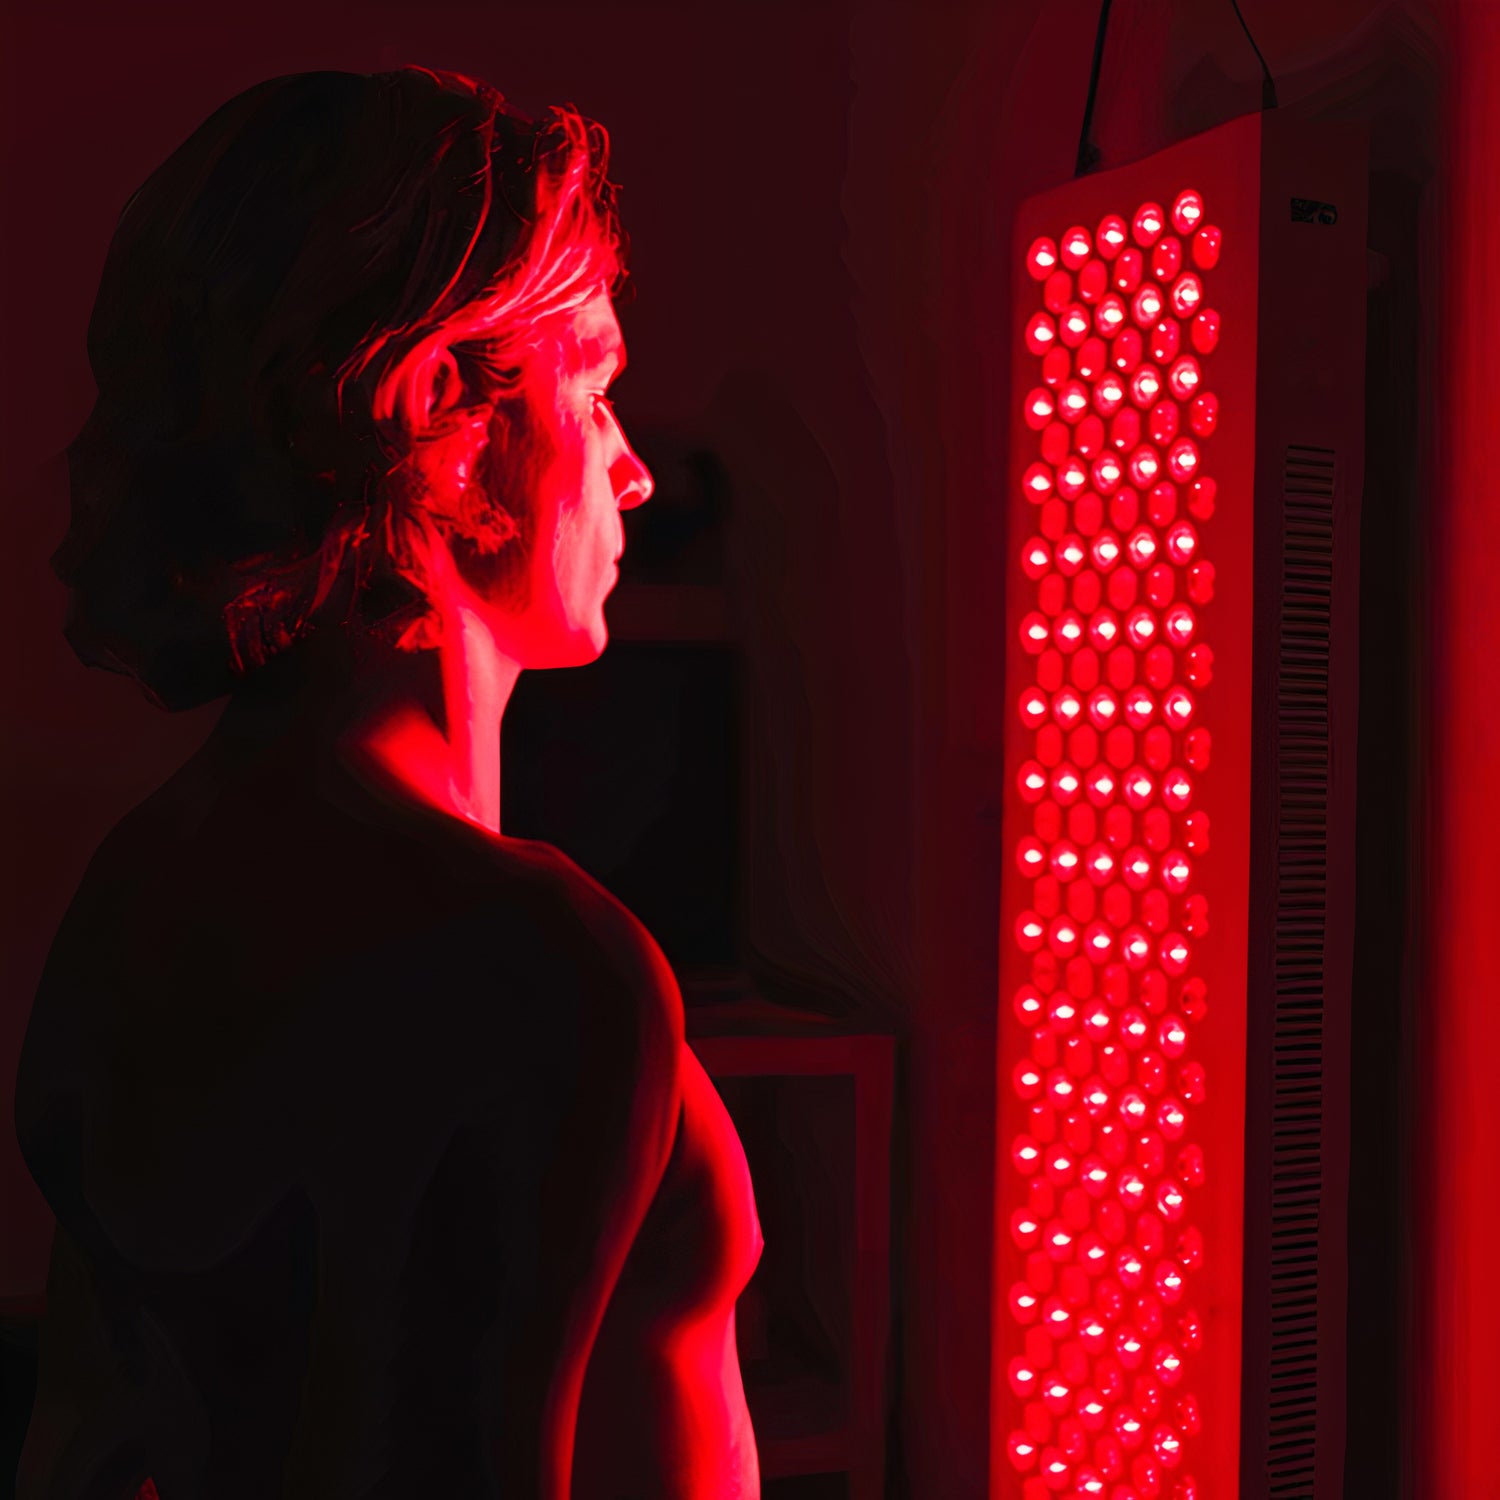 man standing up looking at a red light panel rejuvenating and recovering in a dark room in the uk